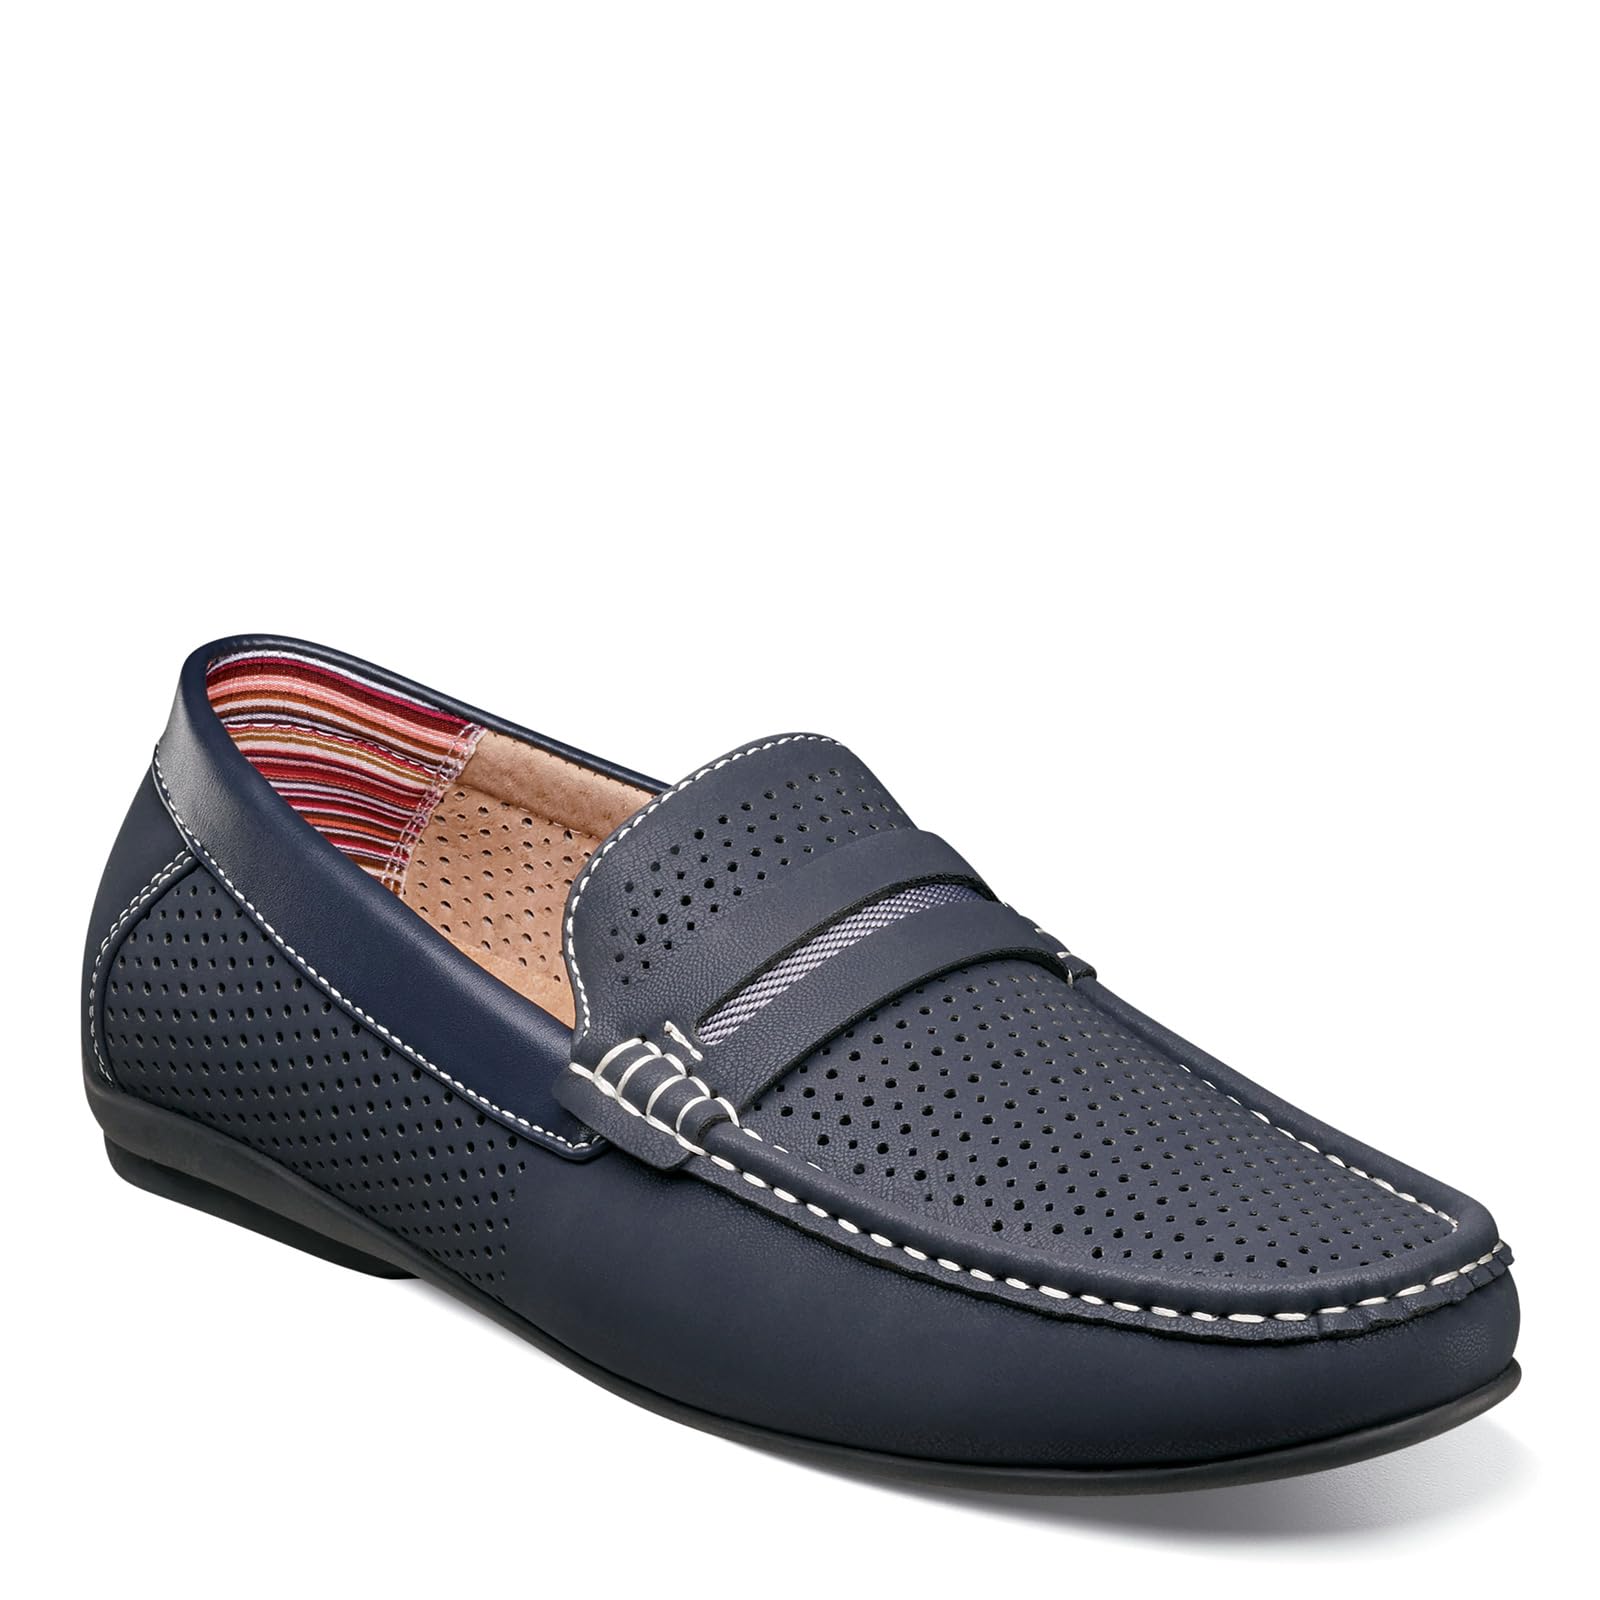 STACY ADAMS Men's, Corby Loafer